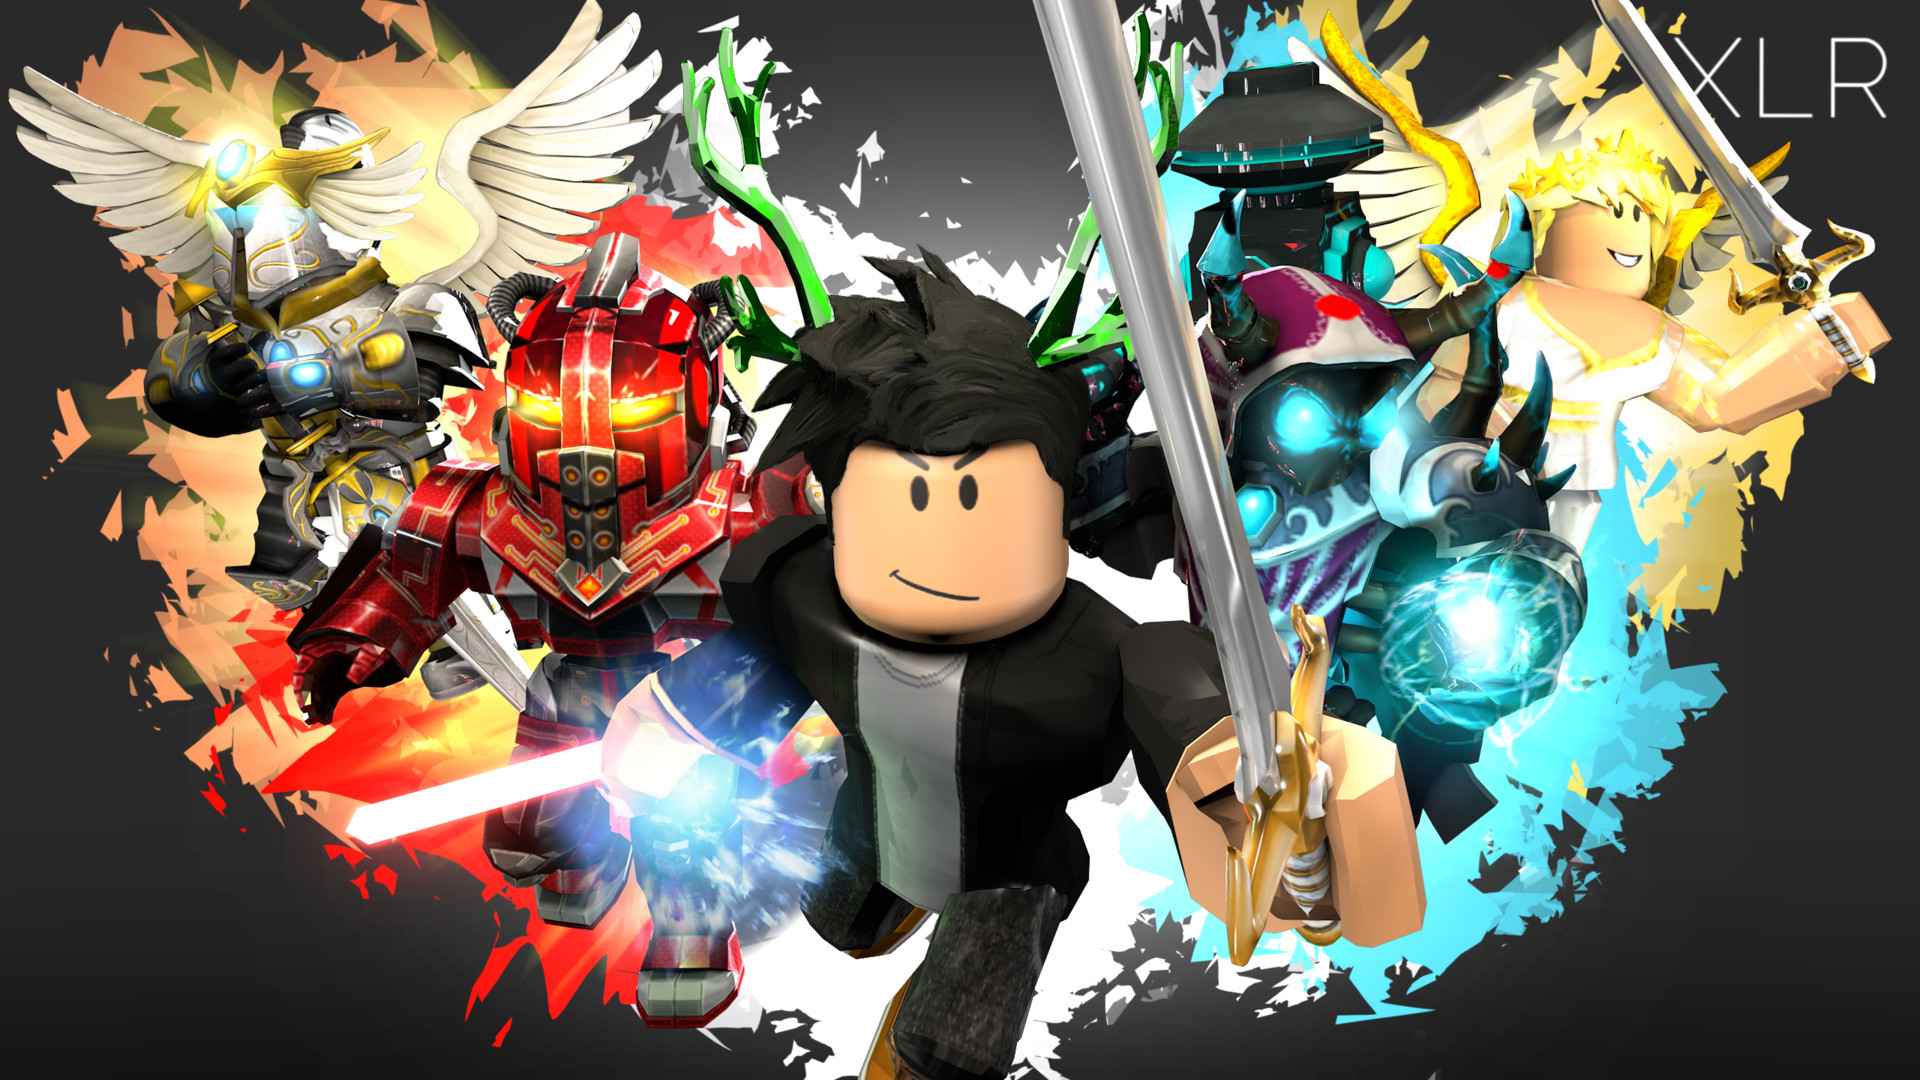 roblox wallpaper HD 4K APK for Android Download